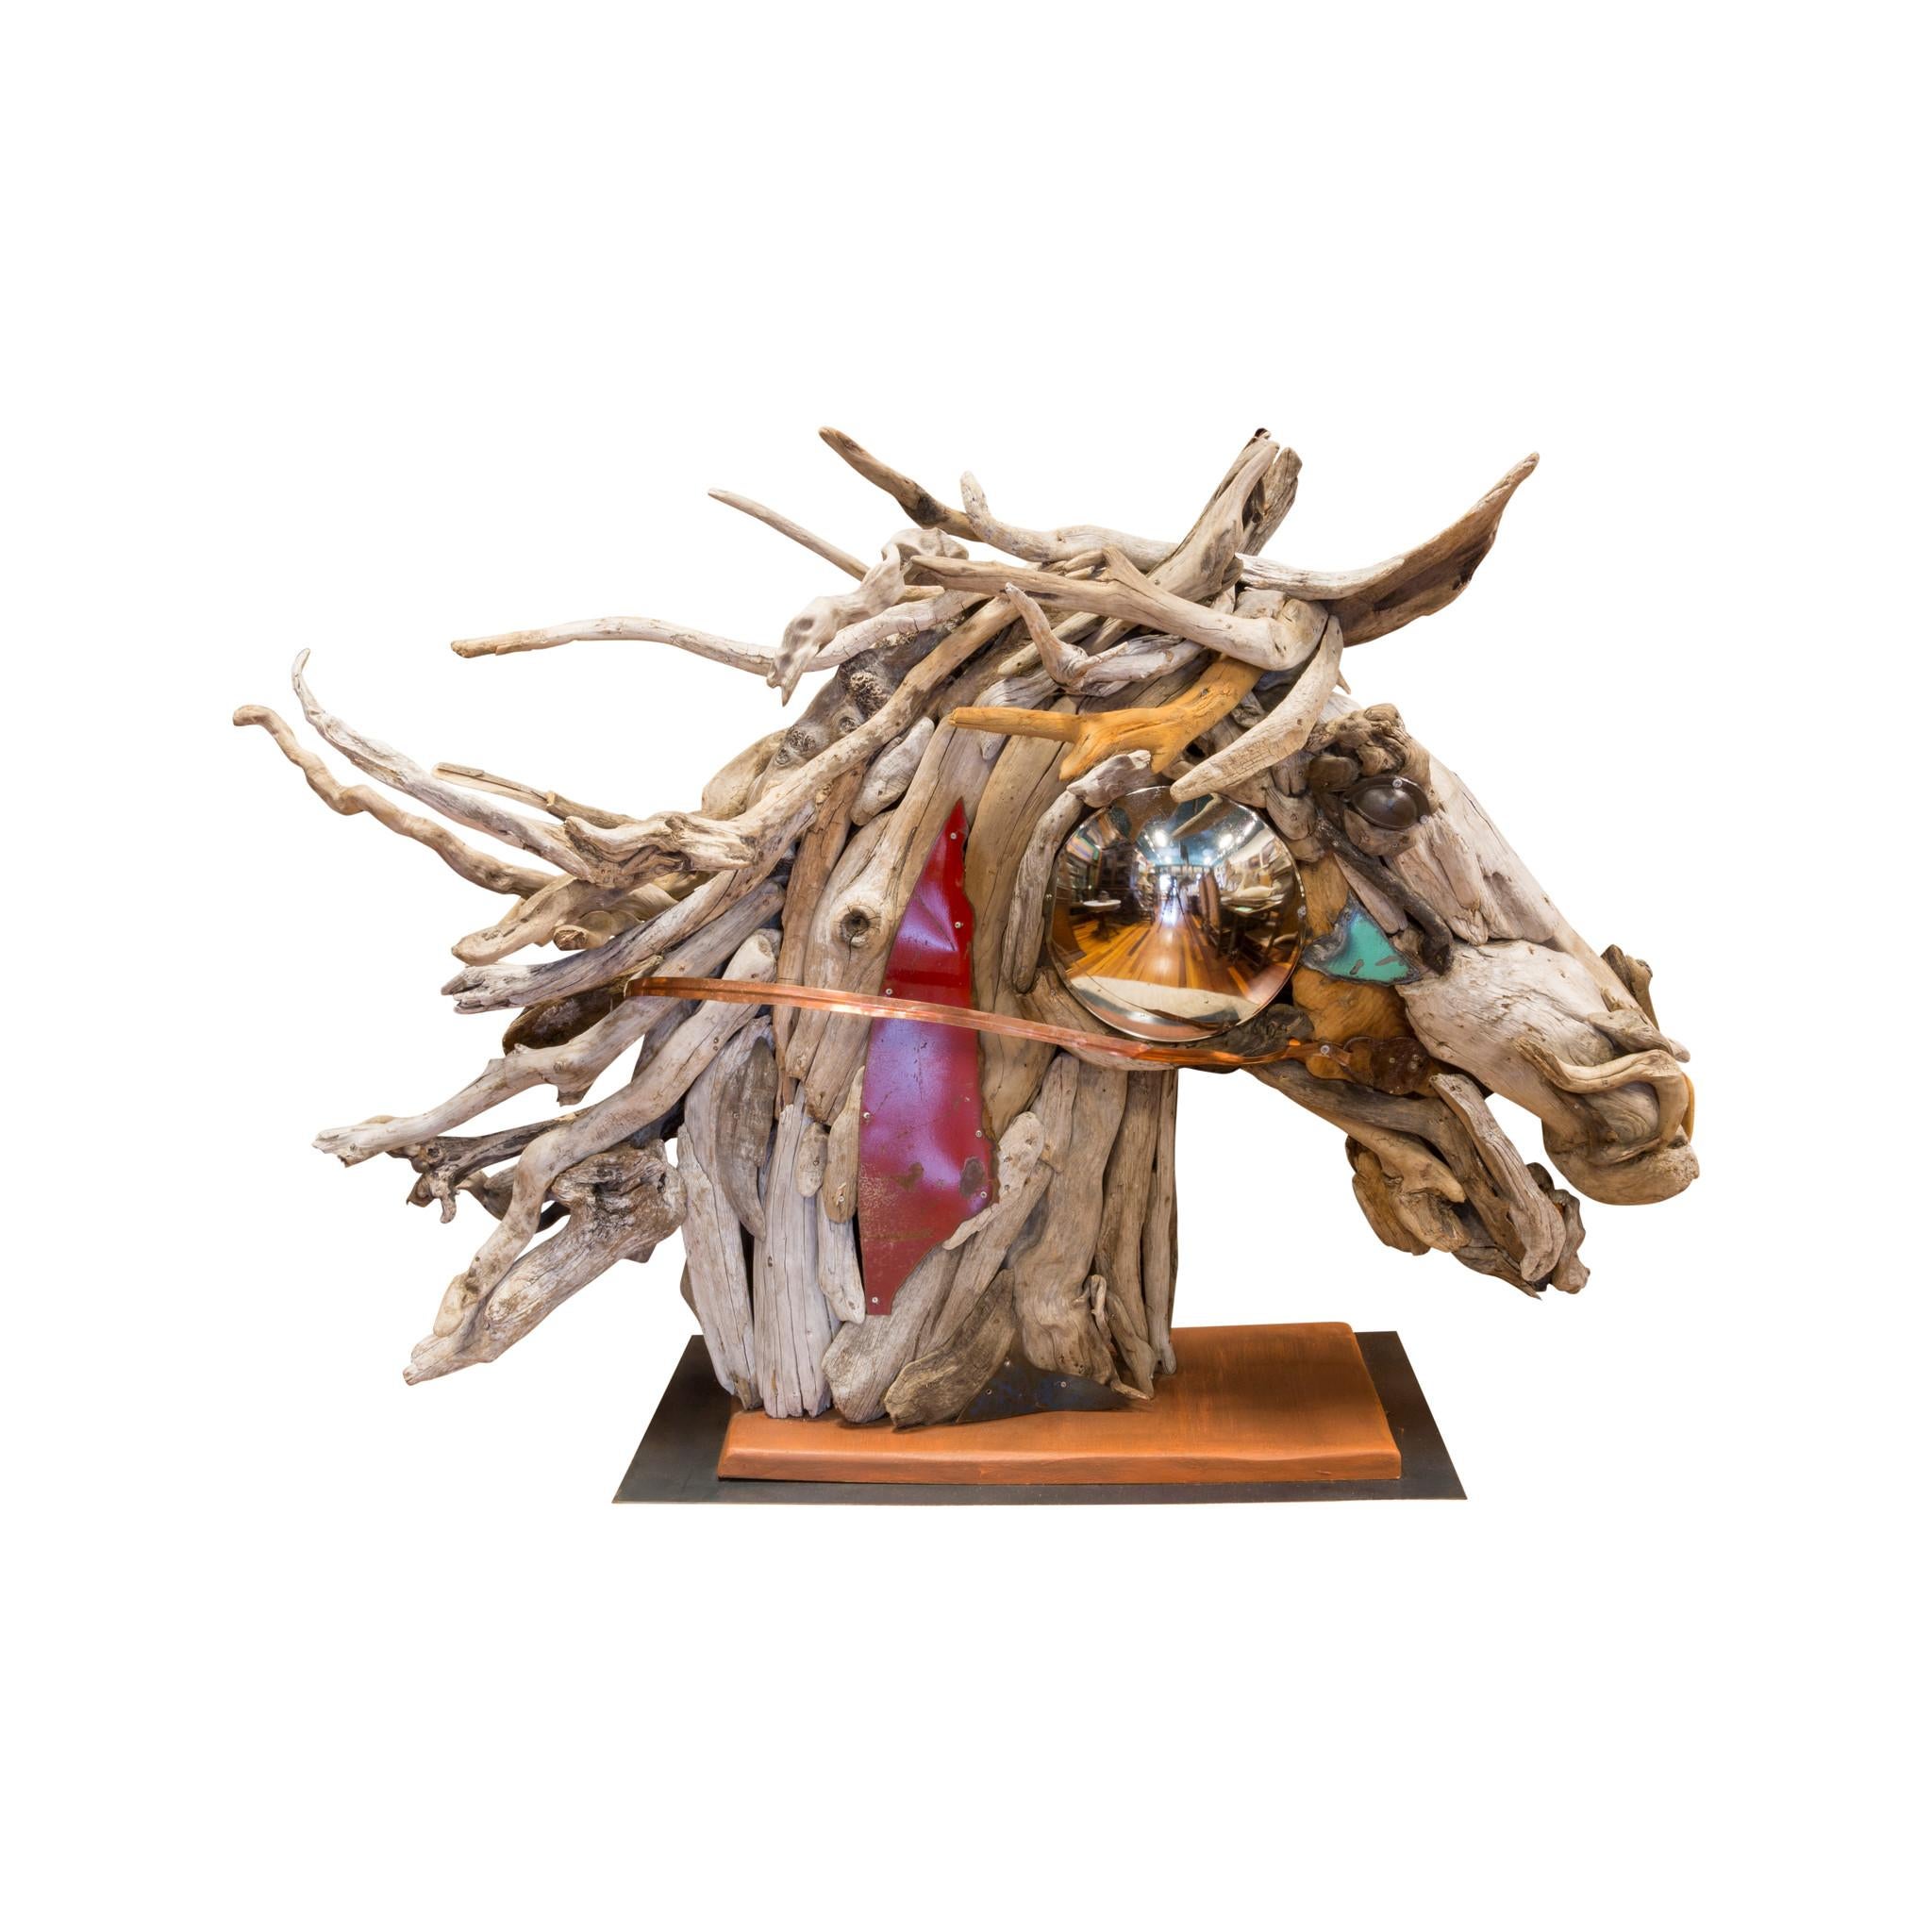 Driftwood Horse Sculpture by Tina Milsavljevich For Sale